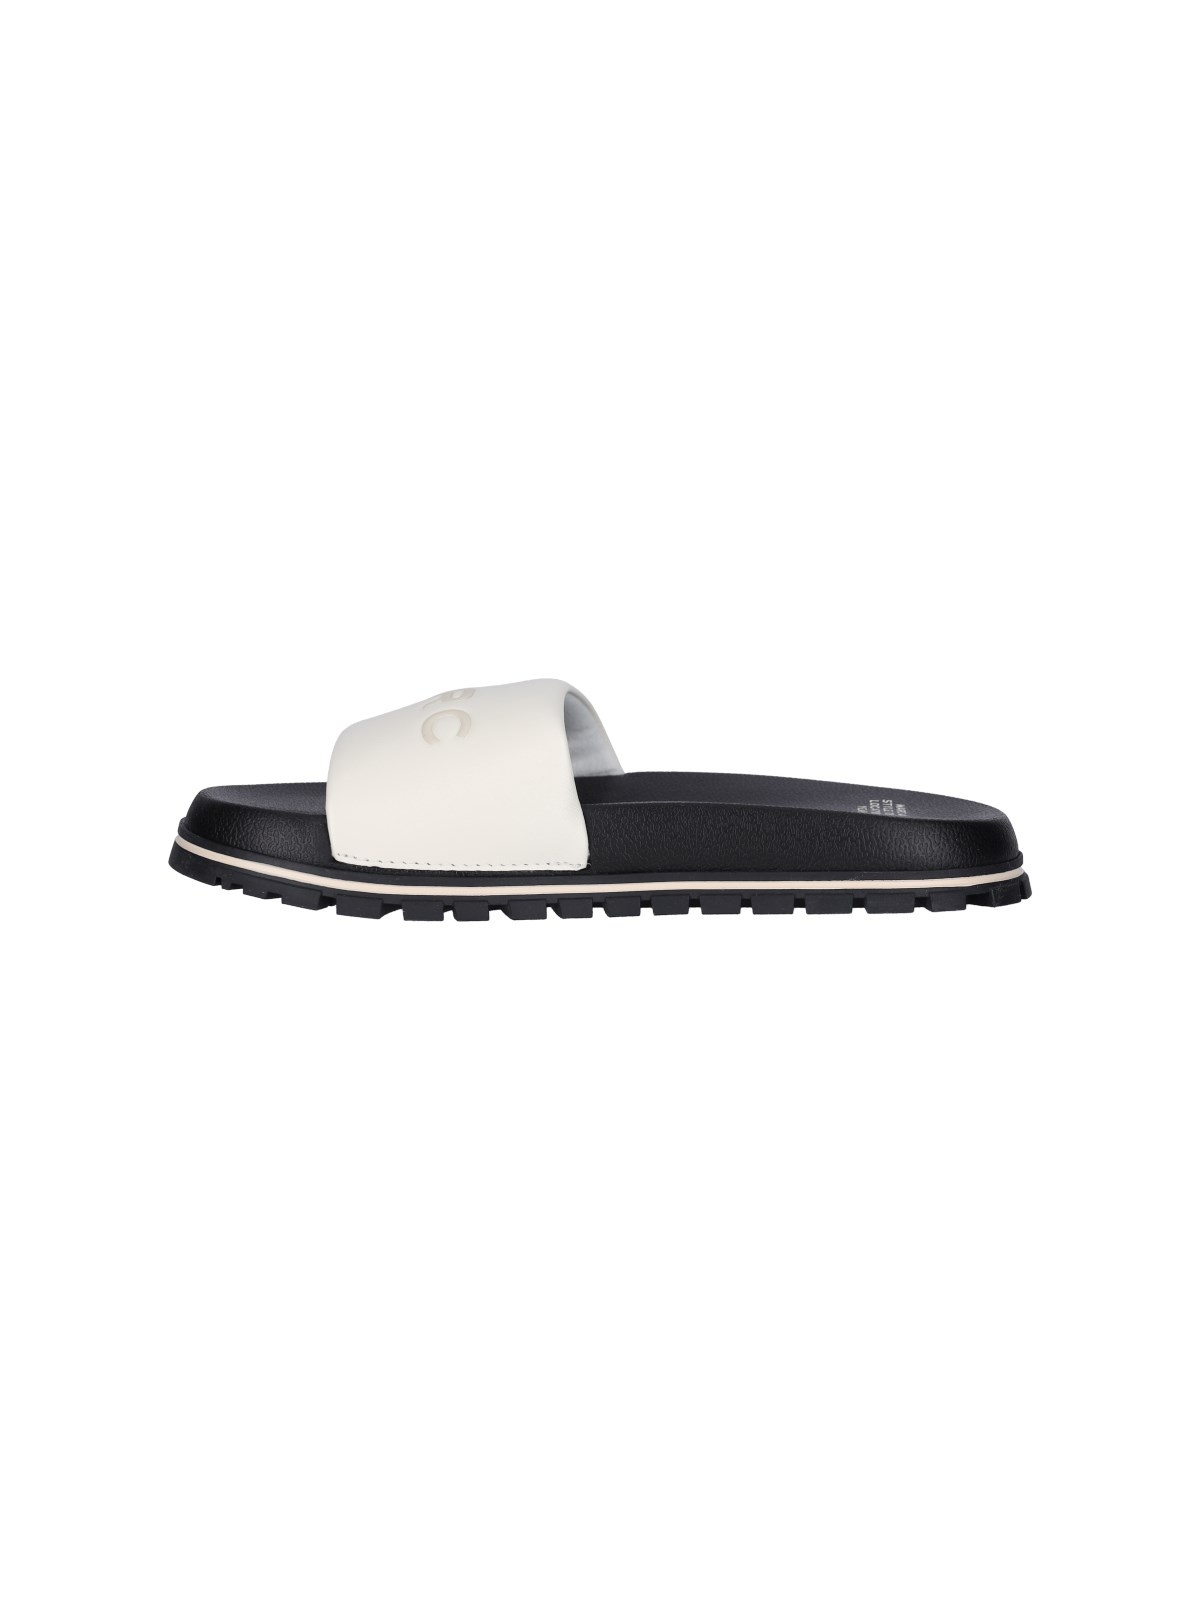 "THE LEATHER" SLIDE SANDALS - 3